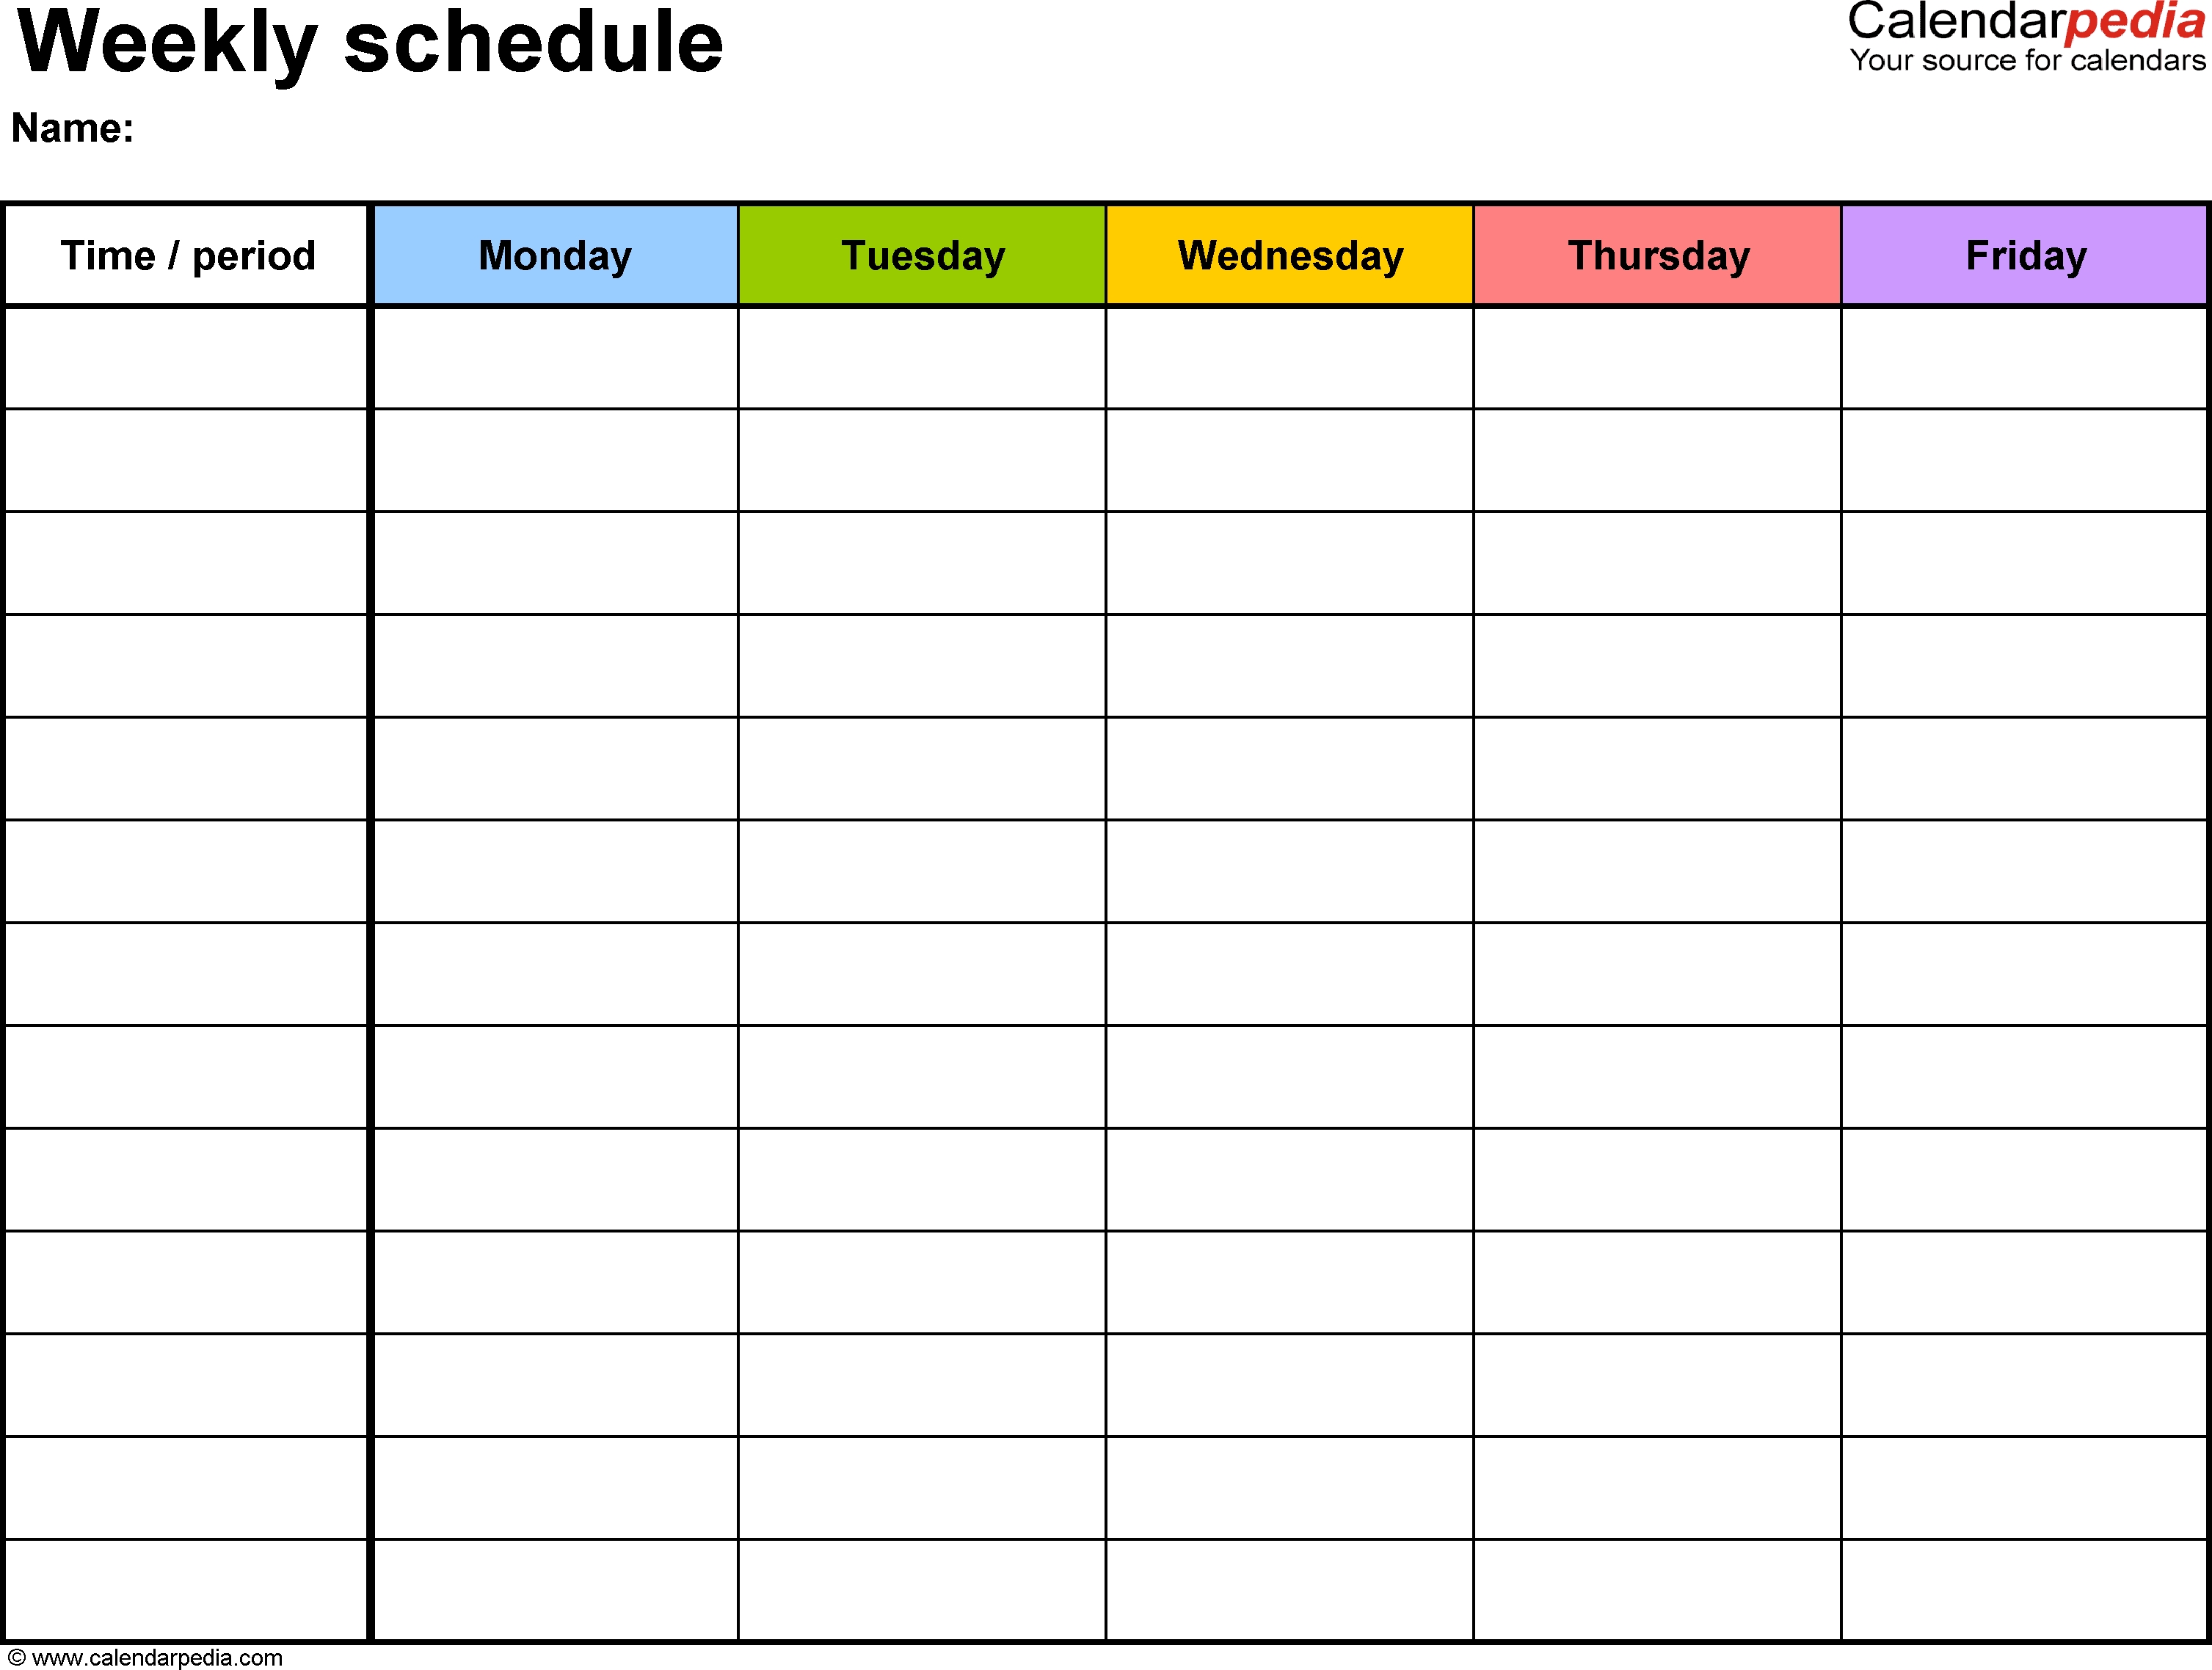 Free Weekly Schedule Templates For Excel - 18 Templates inside Printable Calendar Template Week Day Only